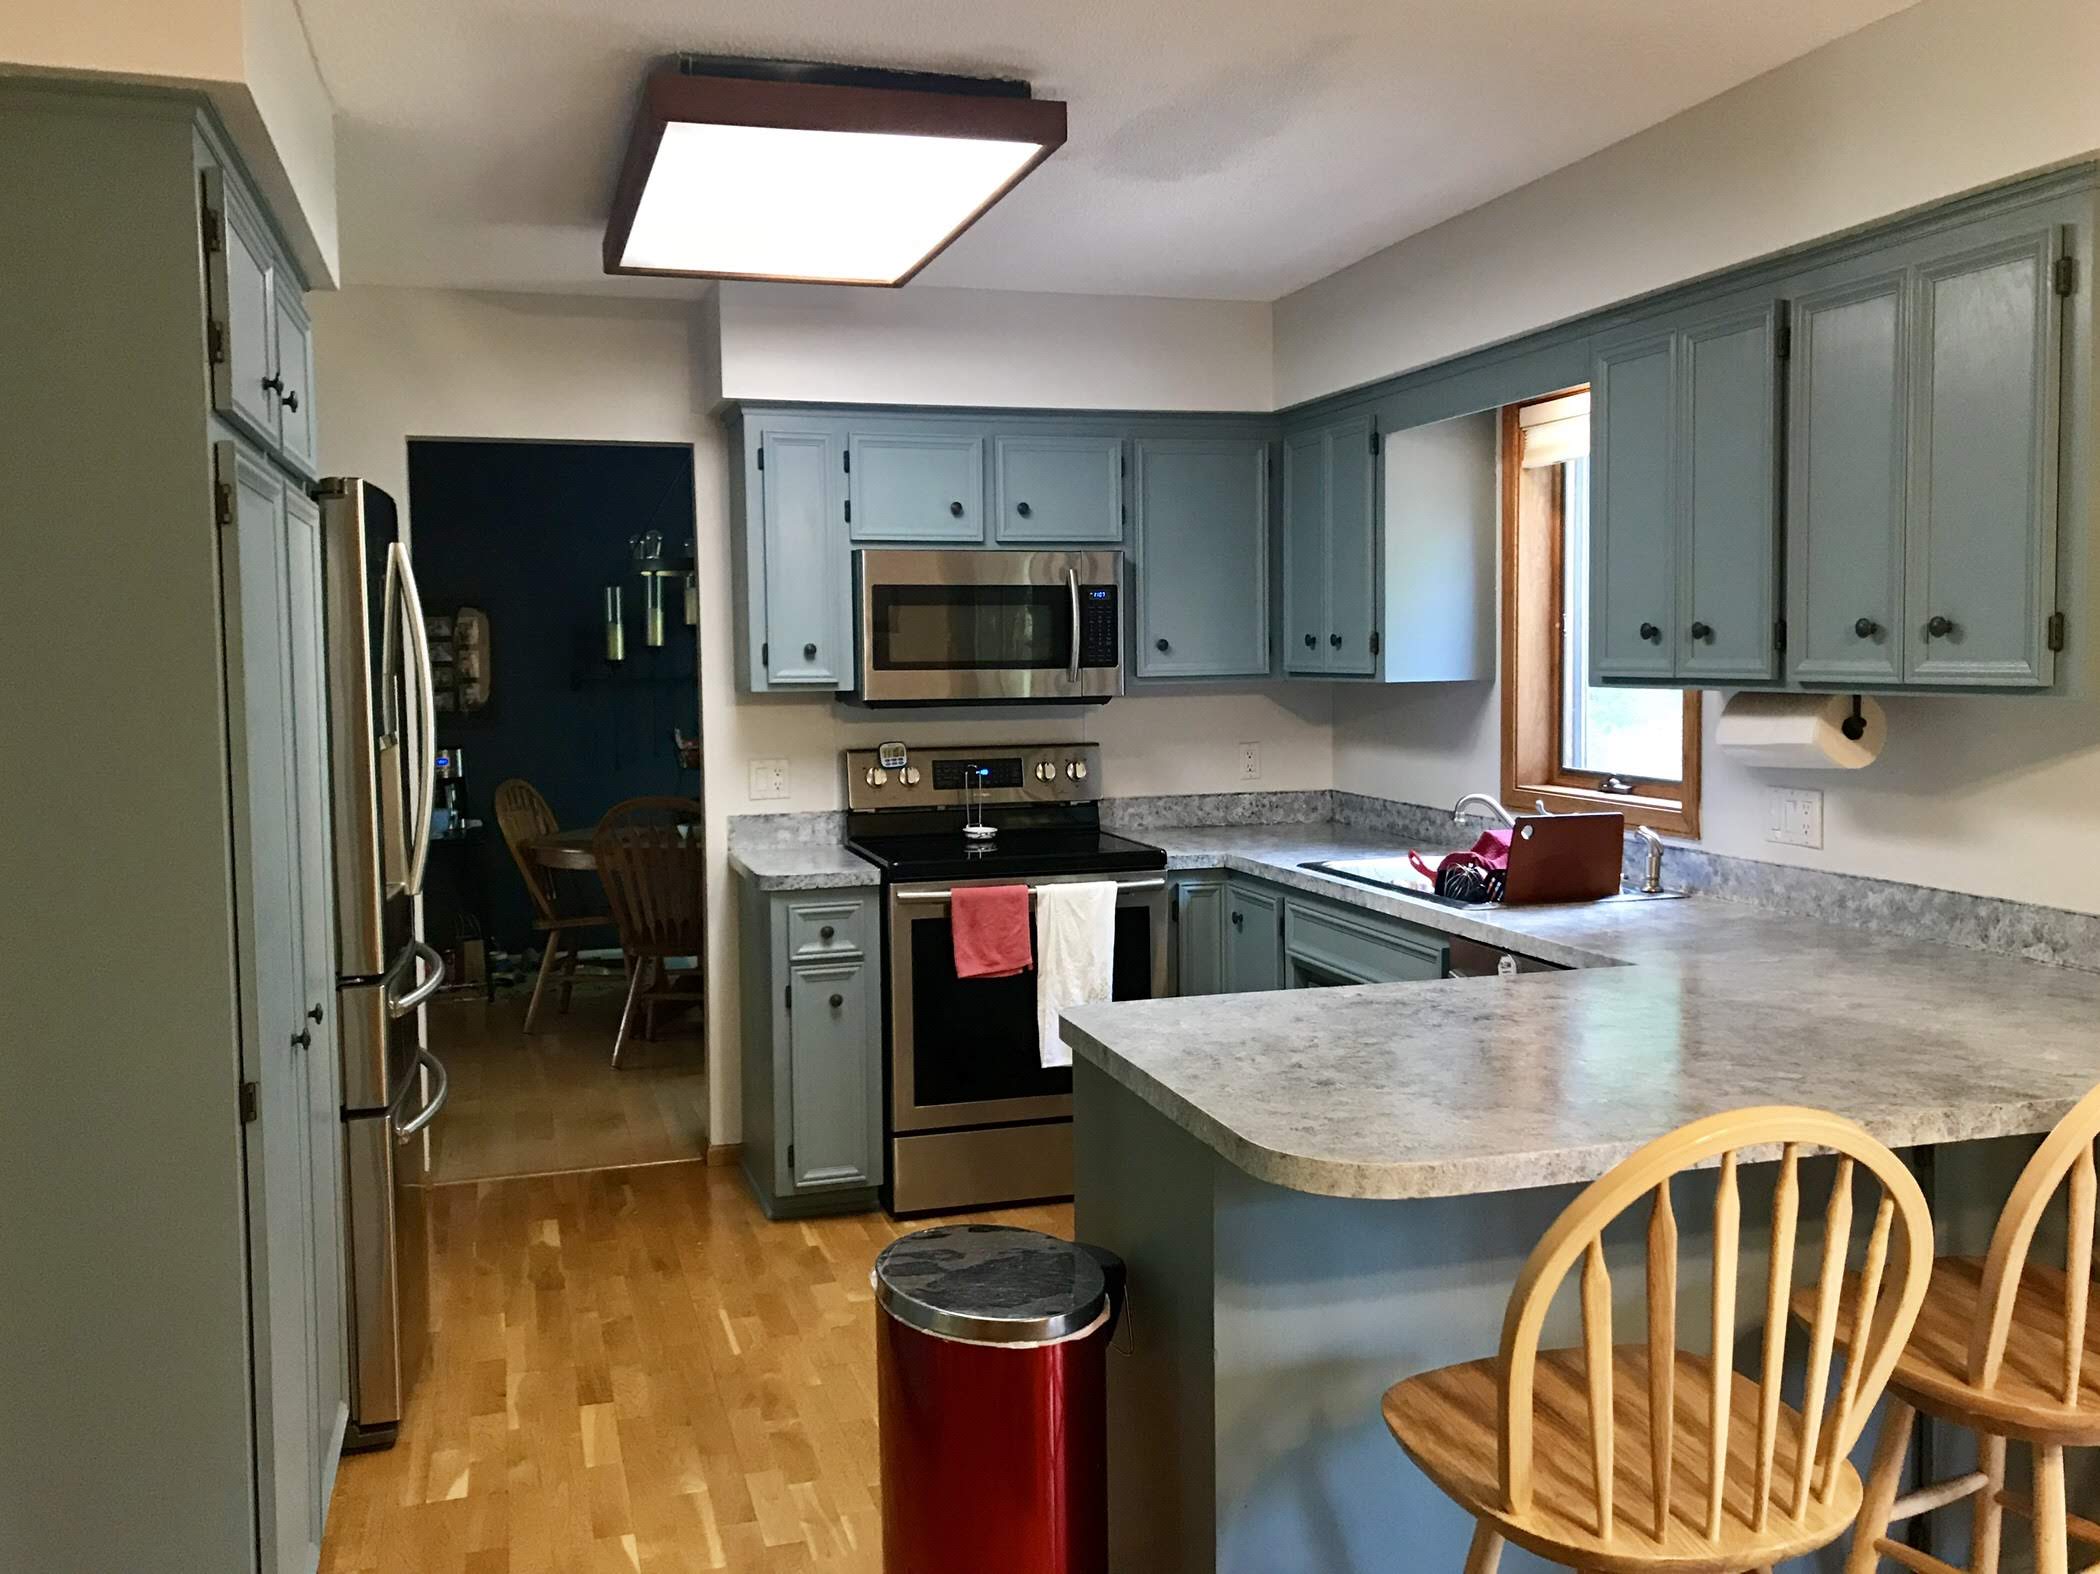 Kitchen before remodel with dark cabinets and outdated fixtures